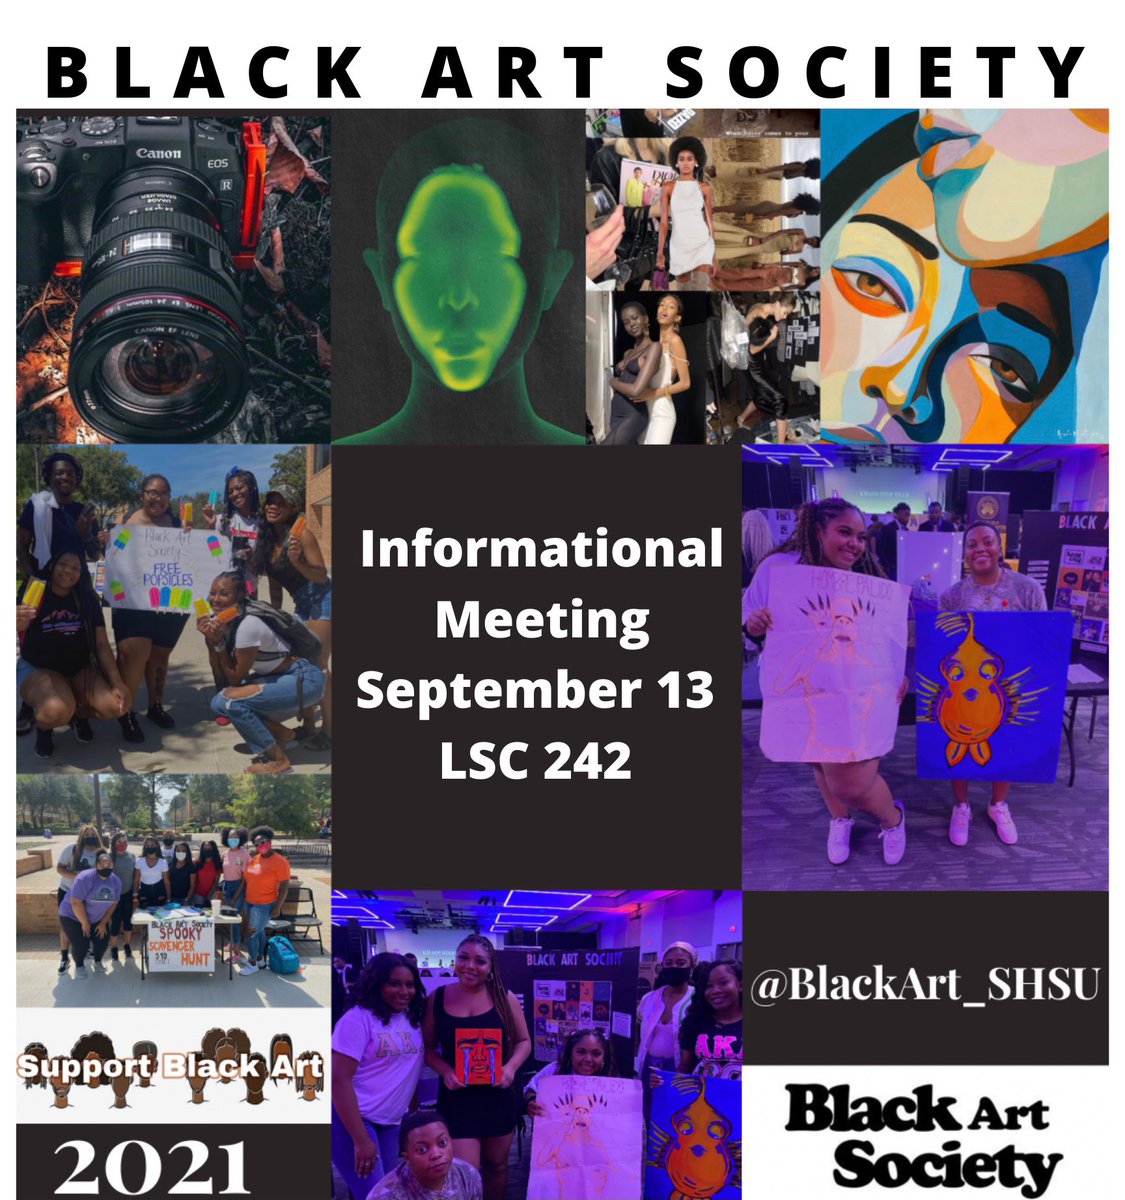 Come on out and see what we’re all about! @BlackArt_SHSU